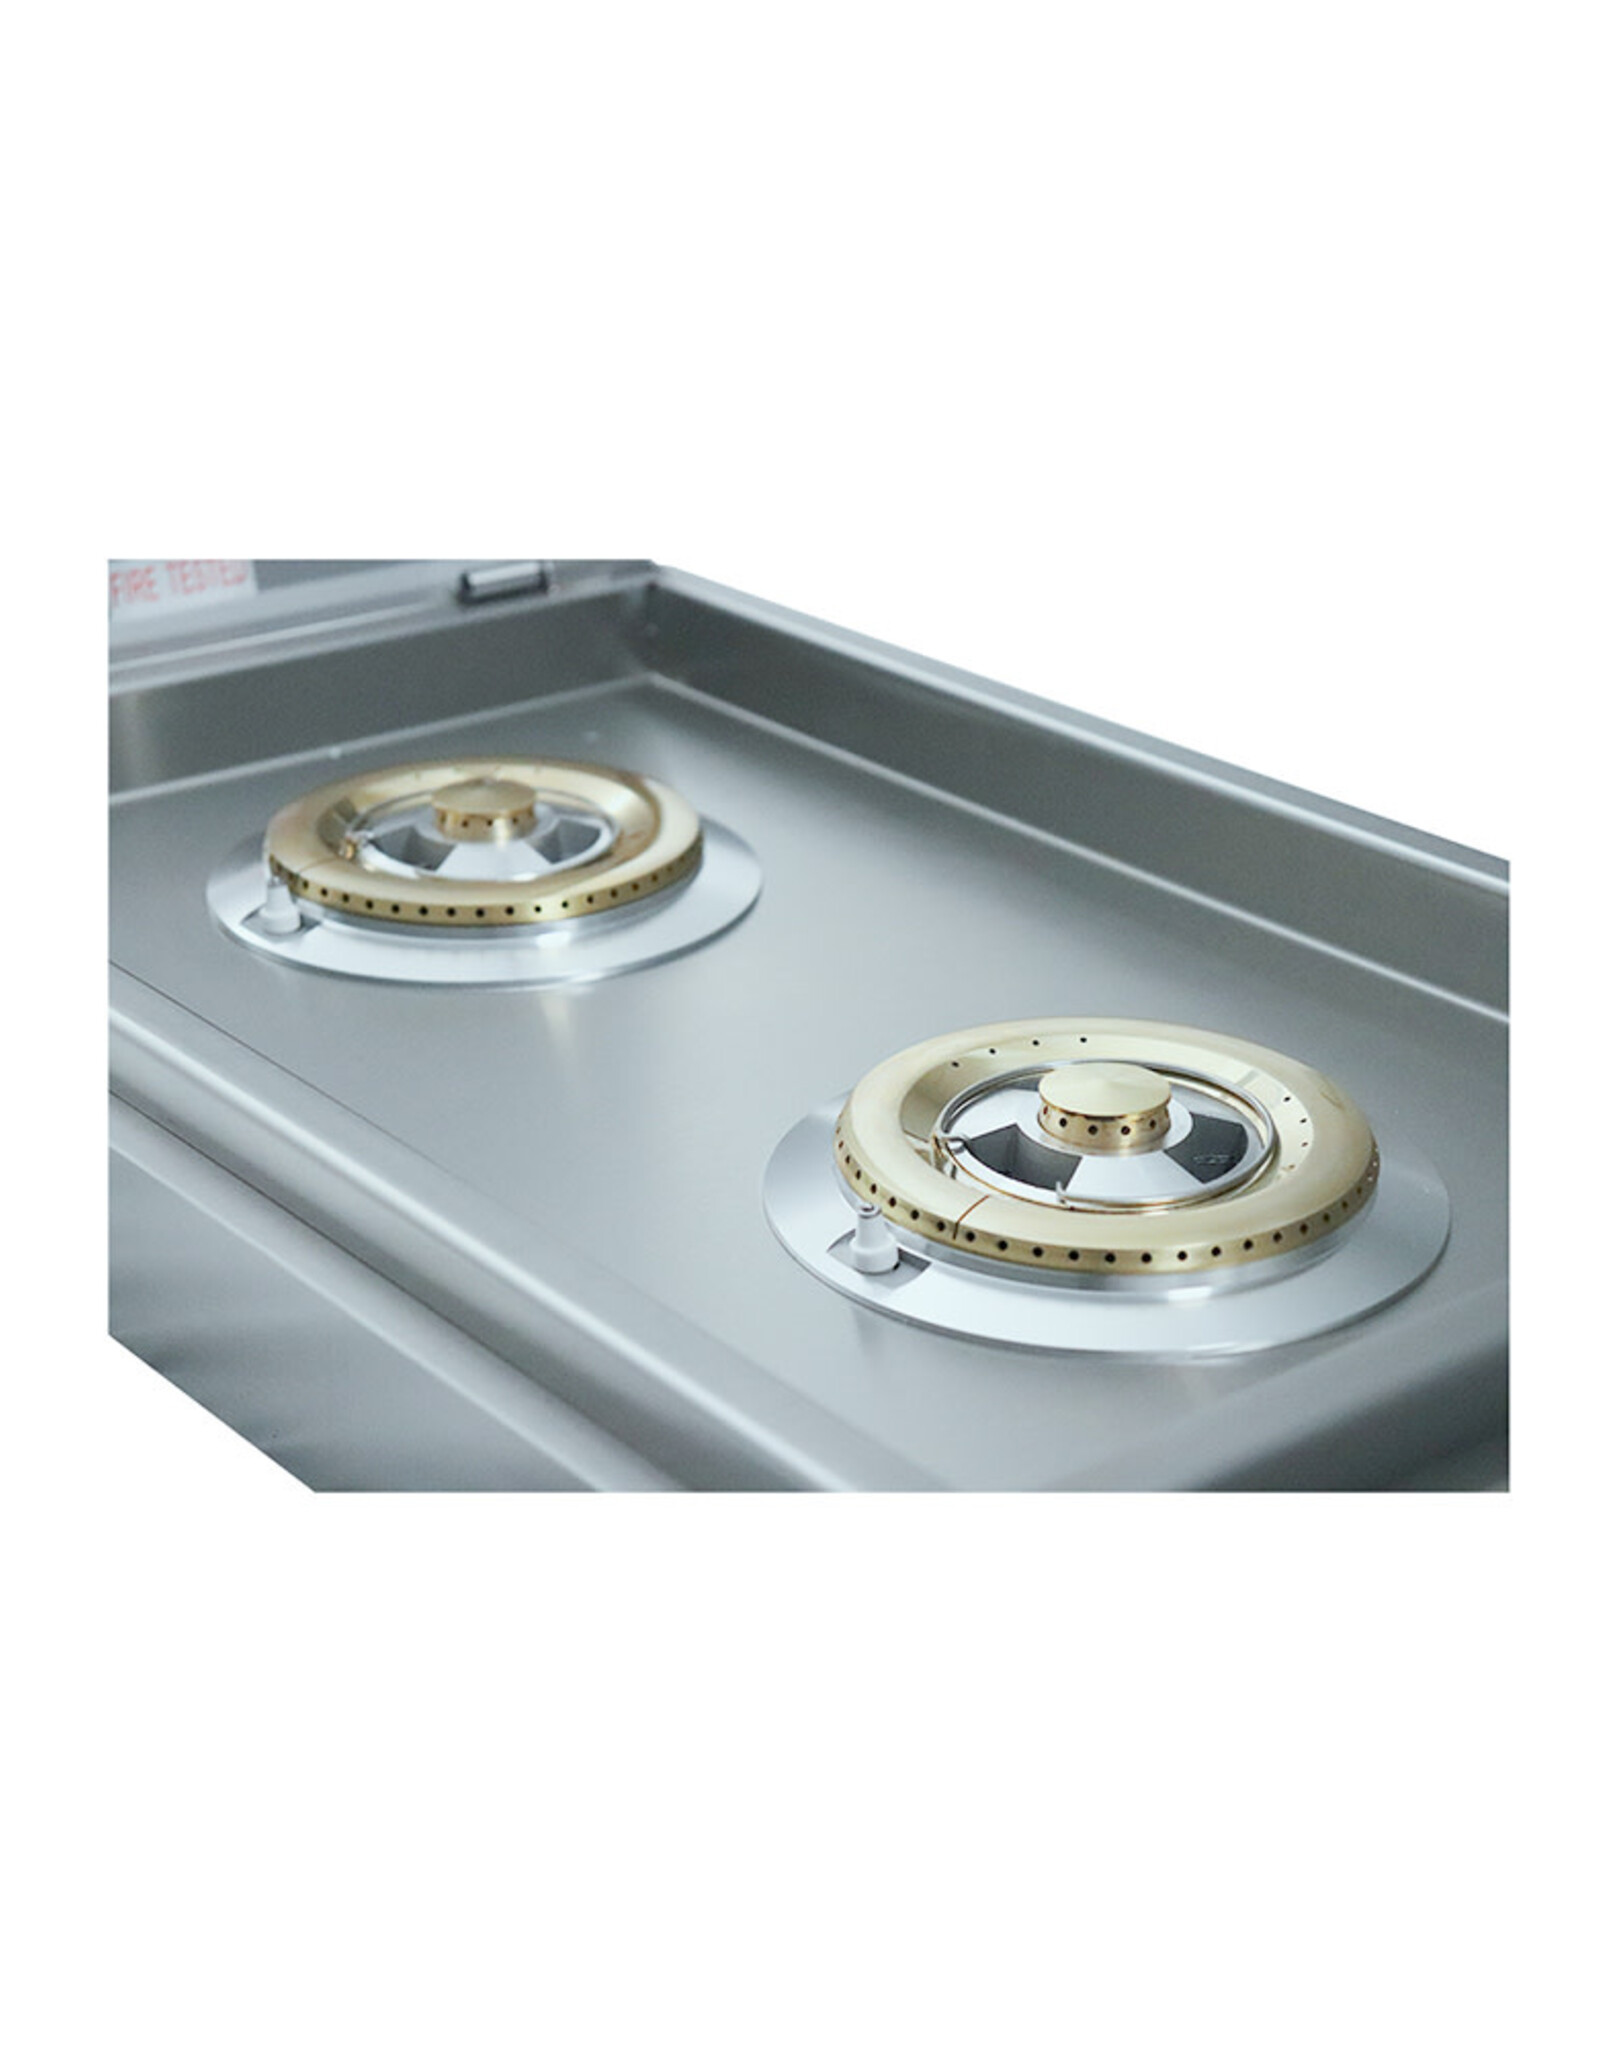 Renaissance Cooking Systems Renaissance Cooking Systems The Cutlass-Pro Series Double Side Burner with LED Lights - Natural Gas - RDB1EL